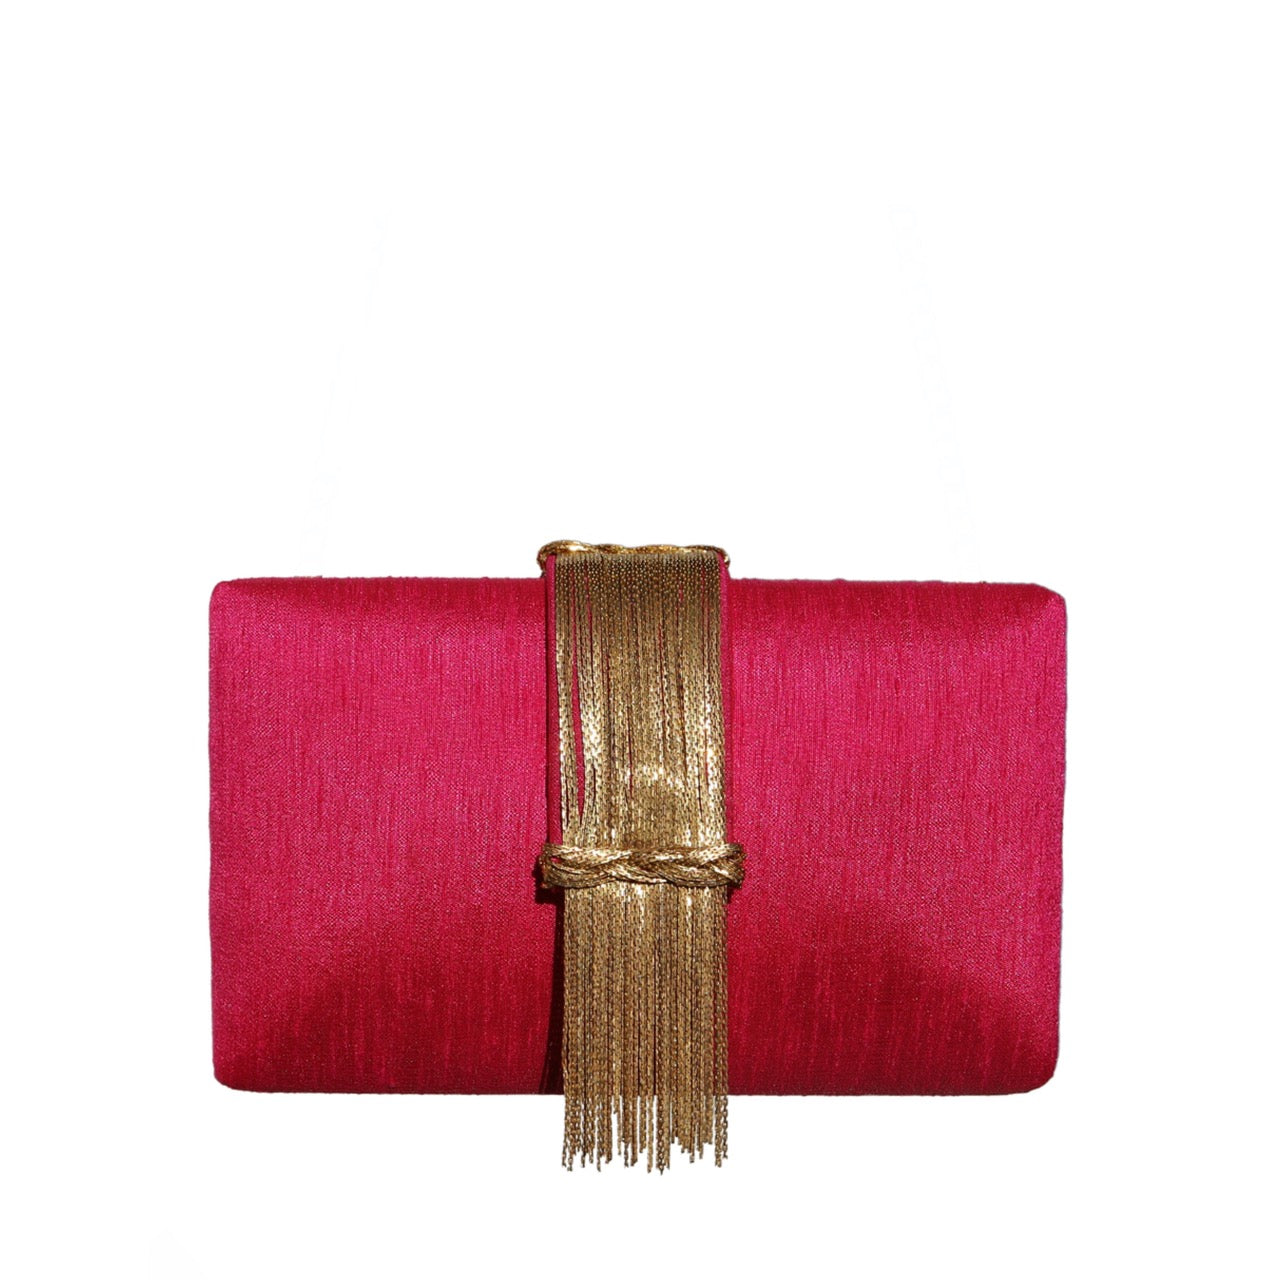 Cranberry Sauce Fringe Clutch by Simitri